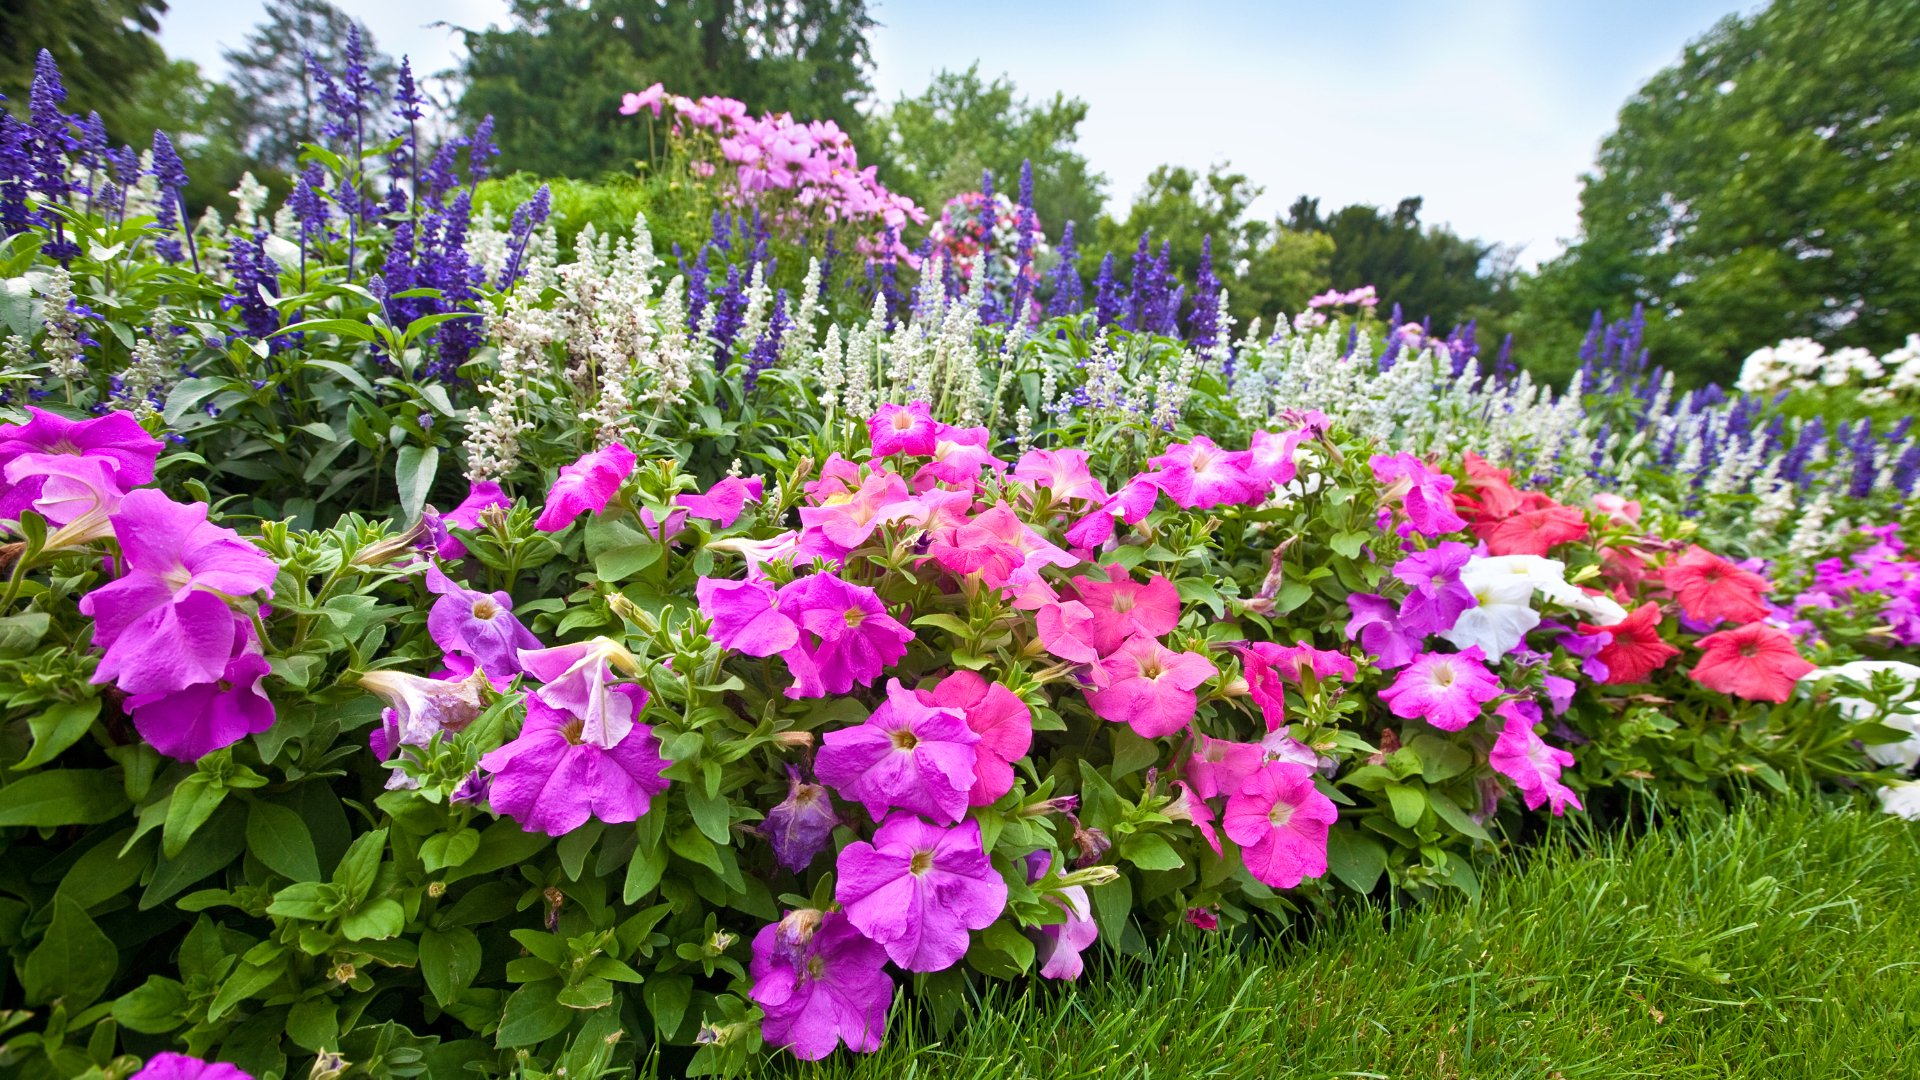 Take Your Landscape Beds to the Next Level With These 5 Perennials!